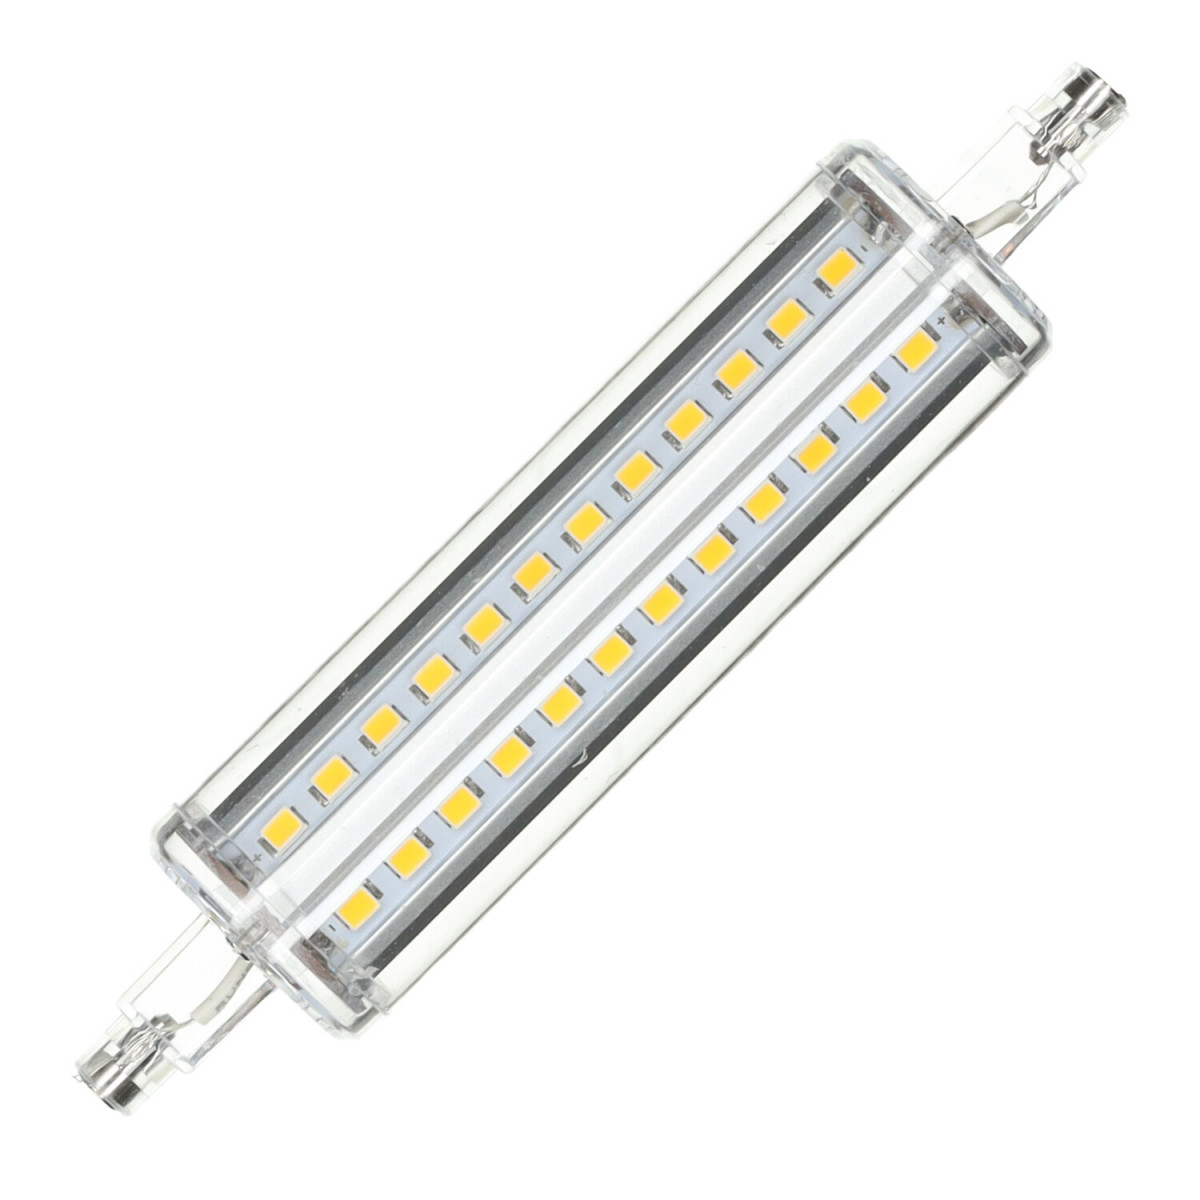 https://facileds.com/8462-large_zoom/r7s-dimmable-led-lamp-360-10w.jpg